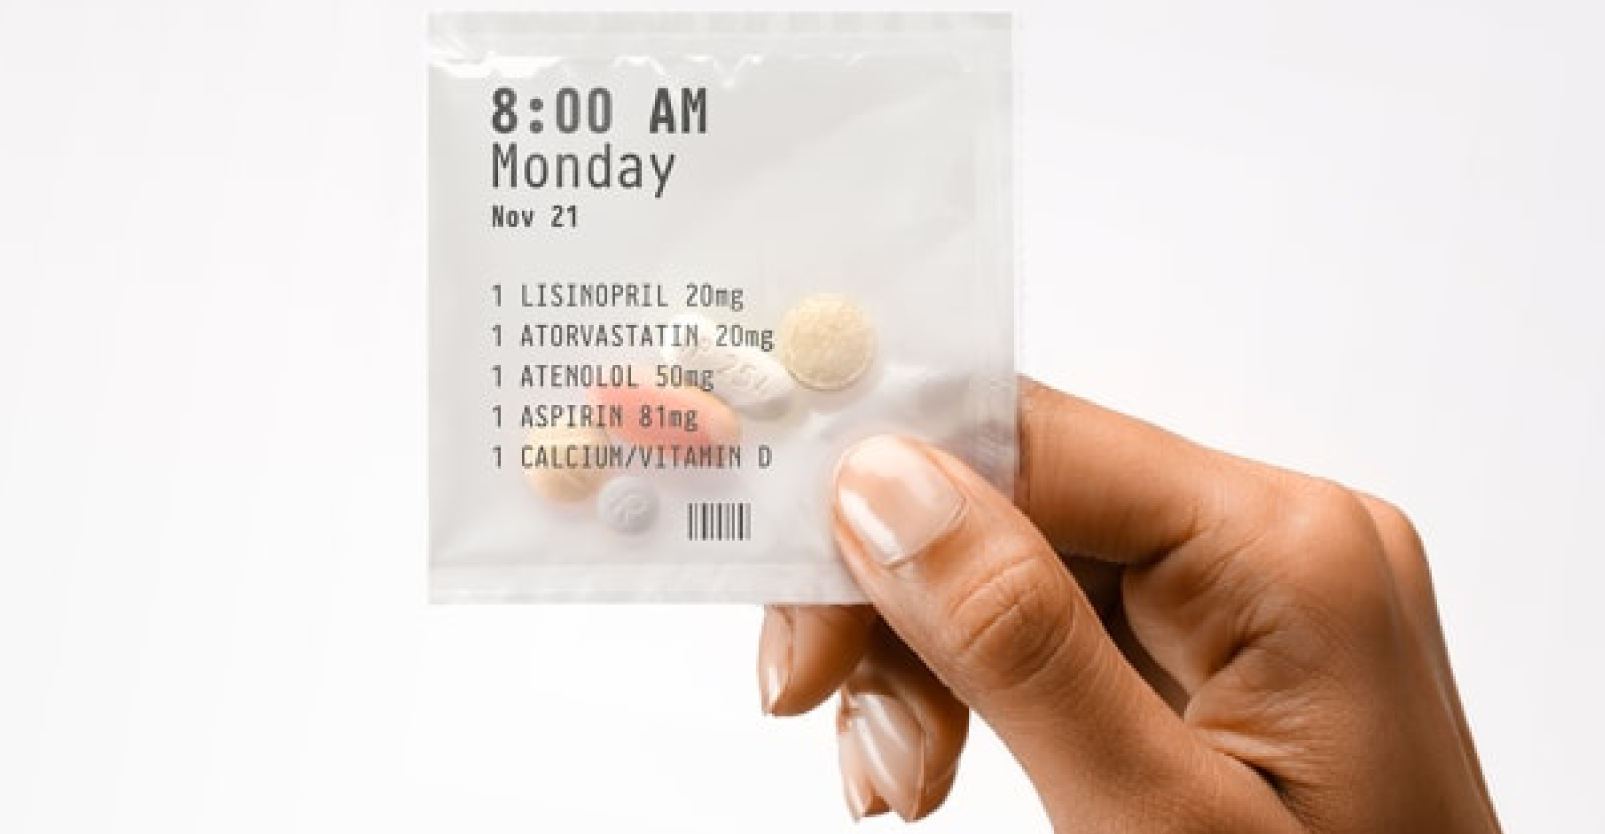 BLUE CROSS LAUNCHED A PARTNERSHIP WITH PILLPACK IN 2019